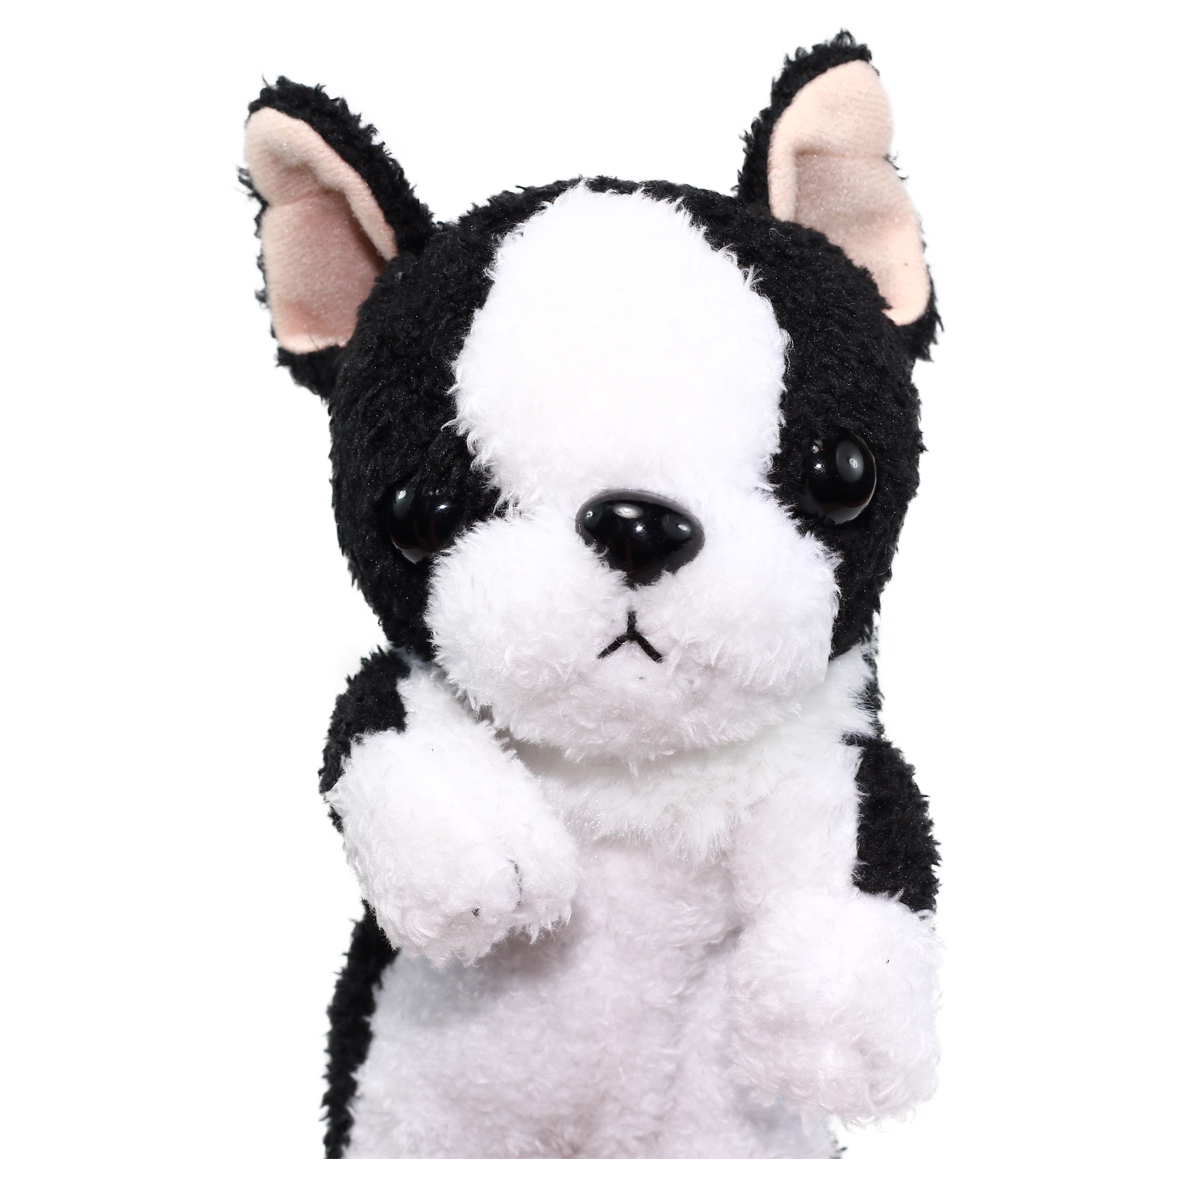 Dog Pencil Case Pouch Stuffed Animal Back To School Collection Fluffy Black/ White Boston Terrier Plush 10 Inches